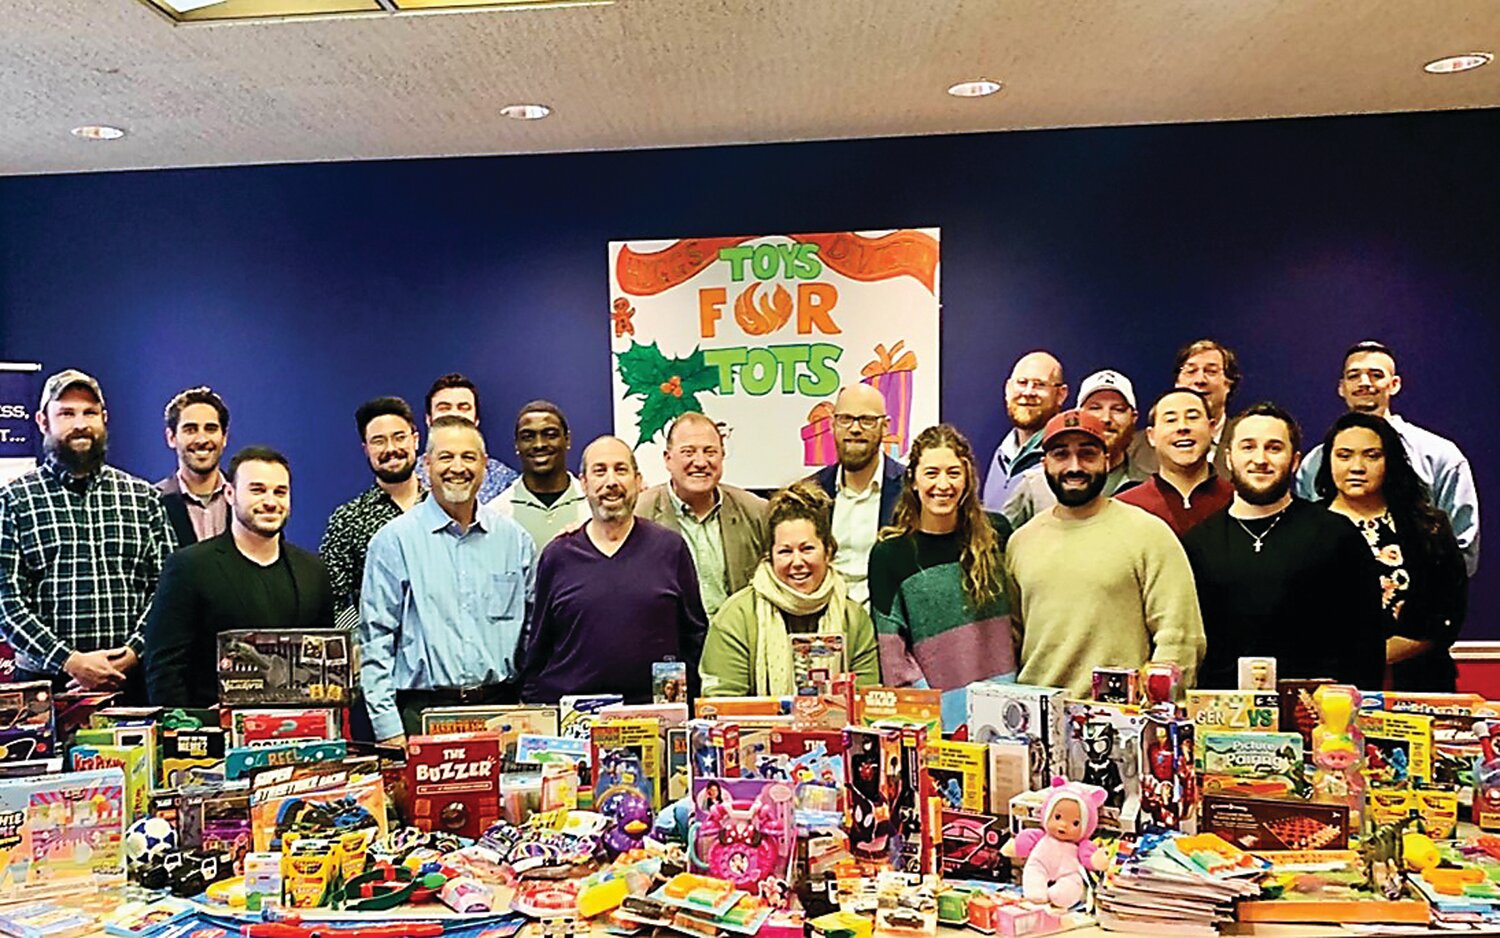 The Quakertown-based Higgins Division of USHEALTH Advisors, a UnitedHealth Care Company, recently helped donate about 350 toys to Toys for Tots through the Central Bucks Regional Police Department and the U.S. Marine Corps Reserves.